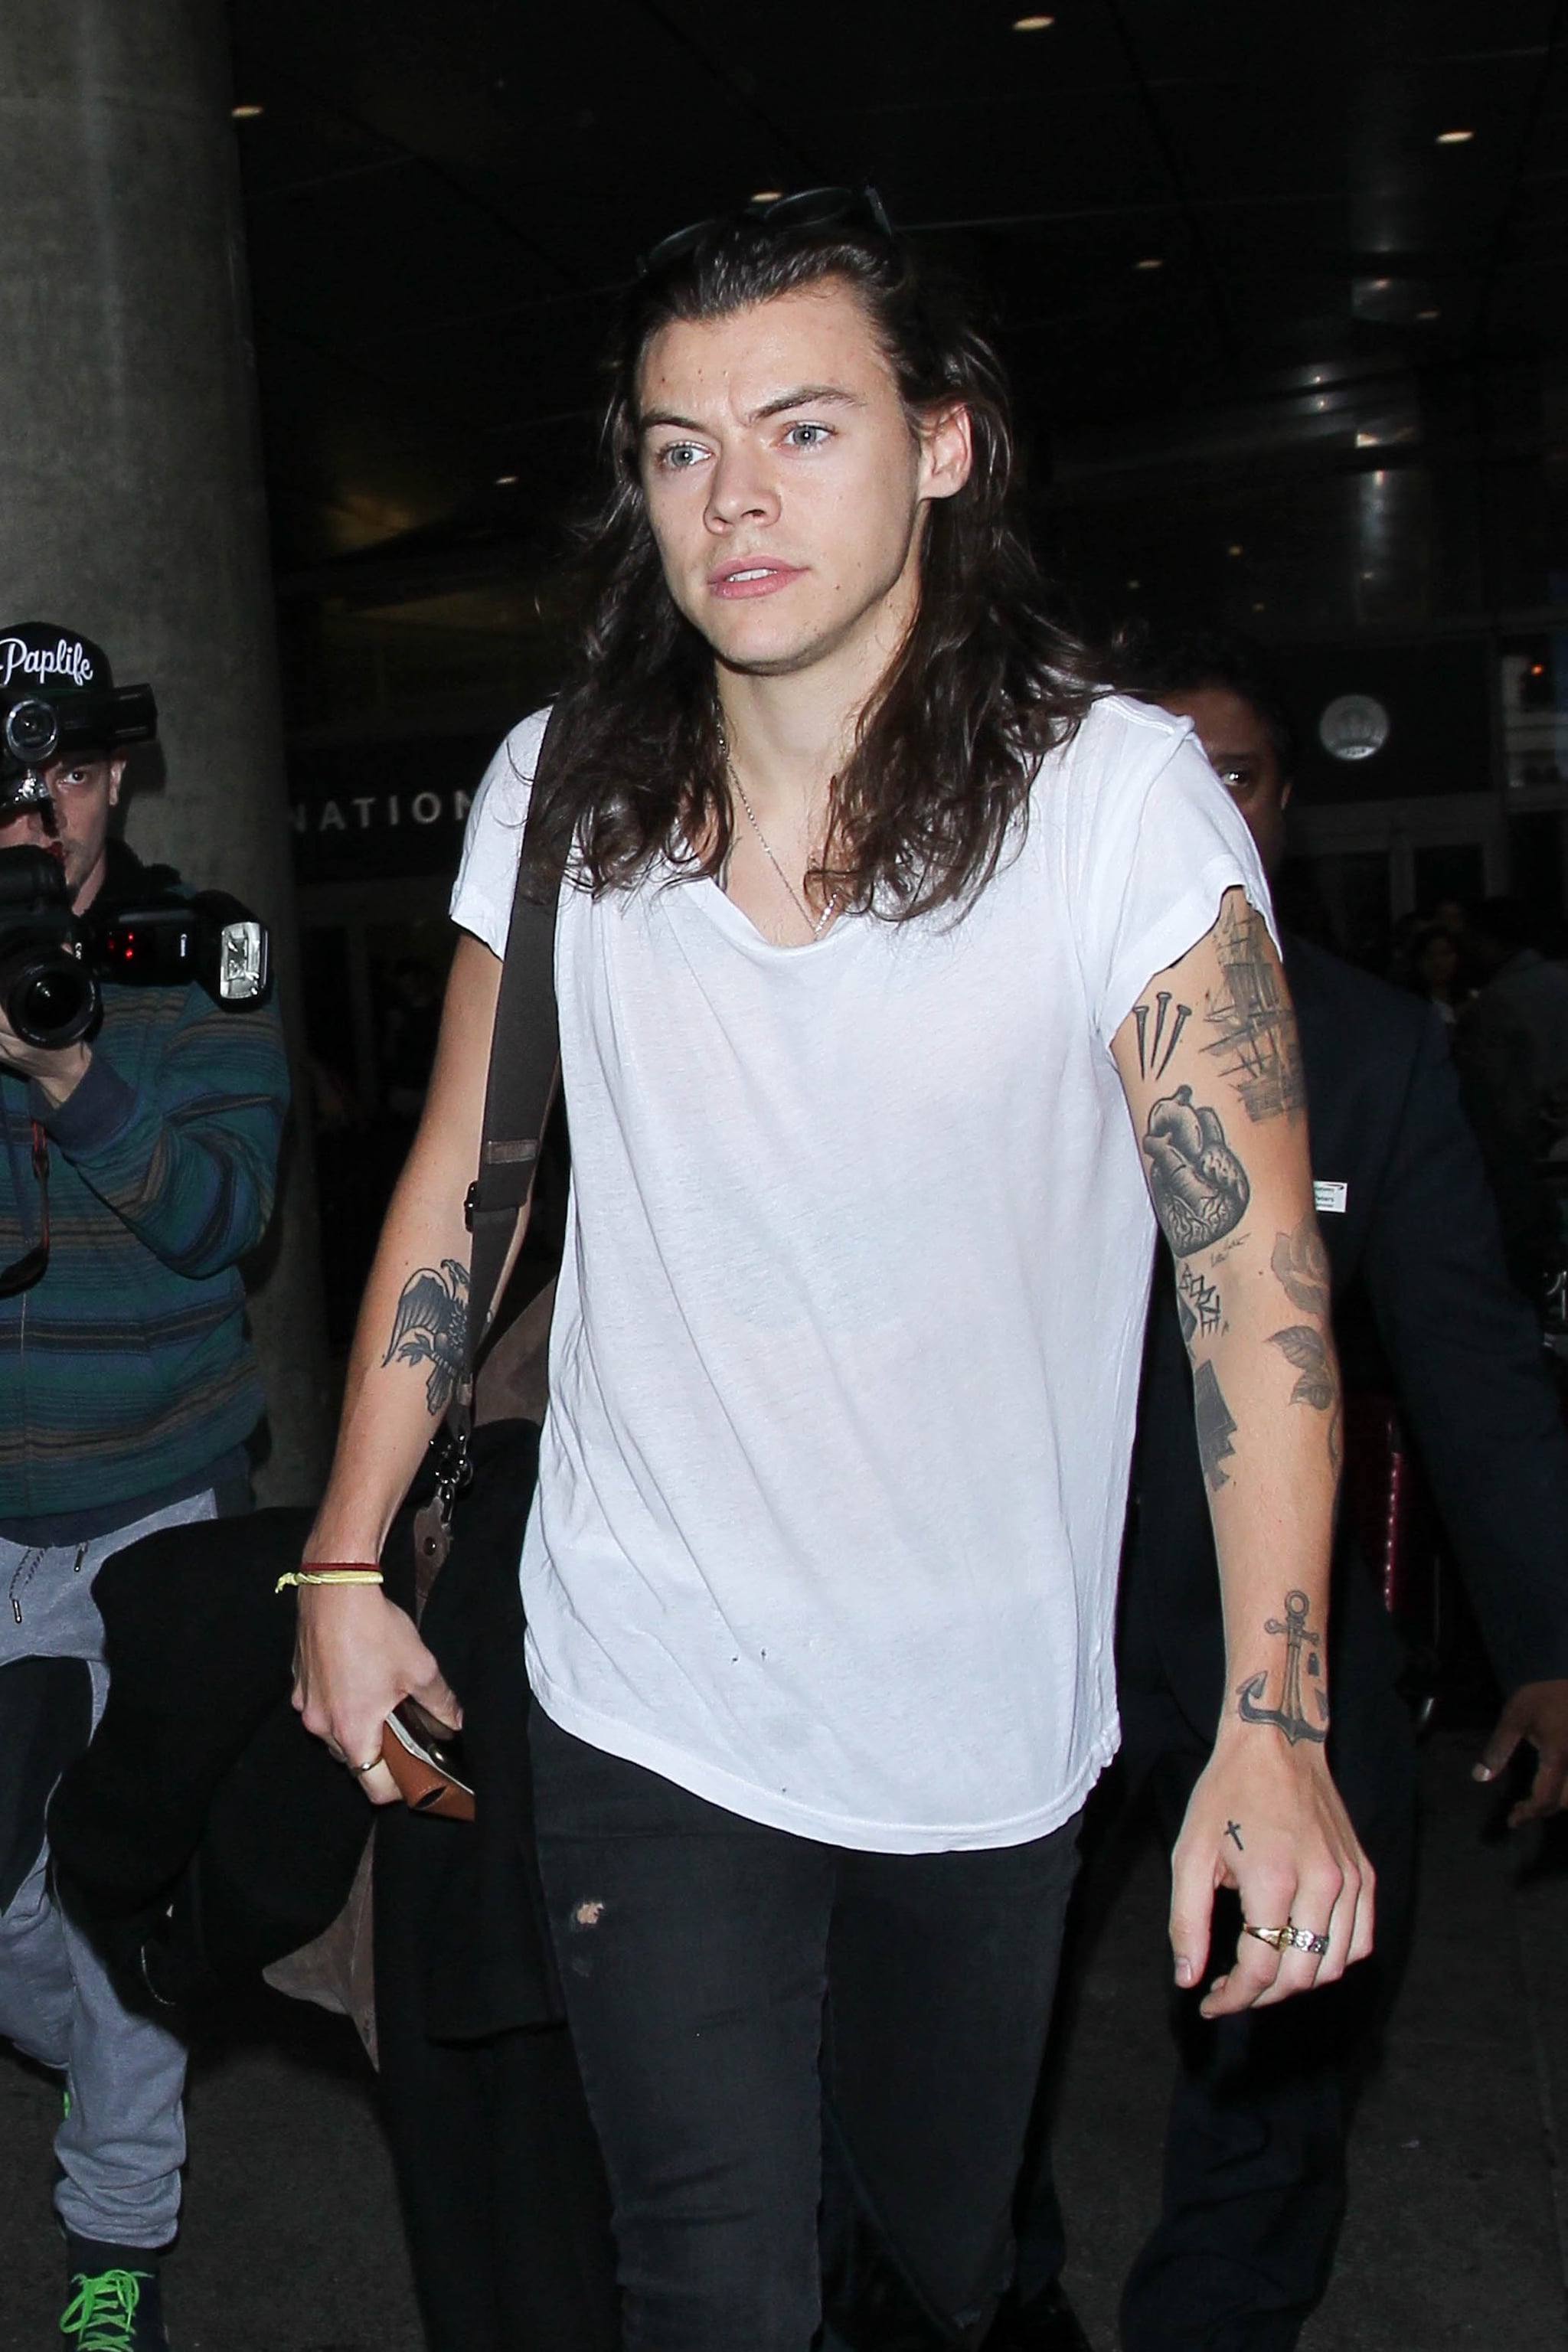 Harry Styles, Olivia Wilde Tattoo Picture: What Does It Mean? Thigh, Breakup